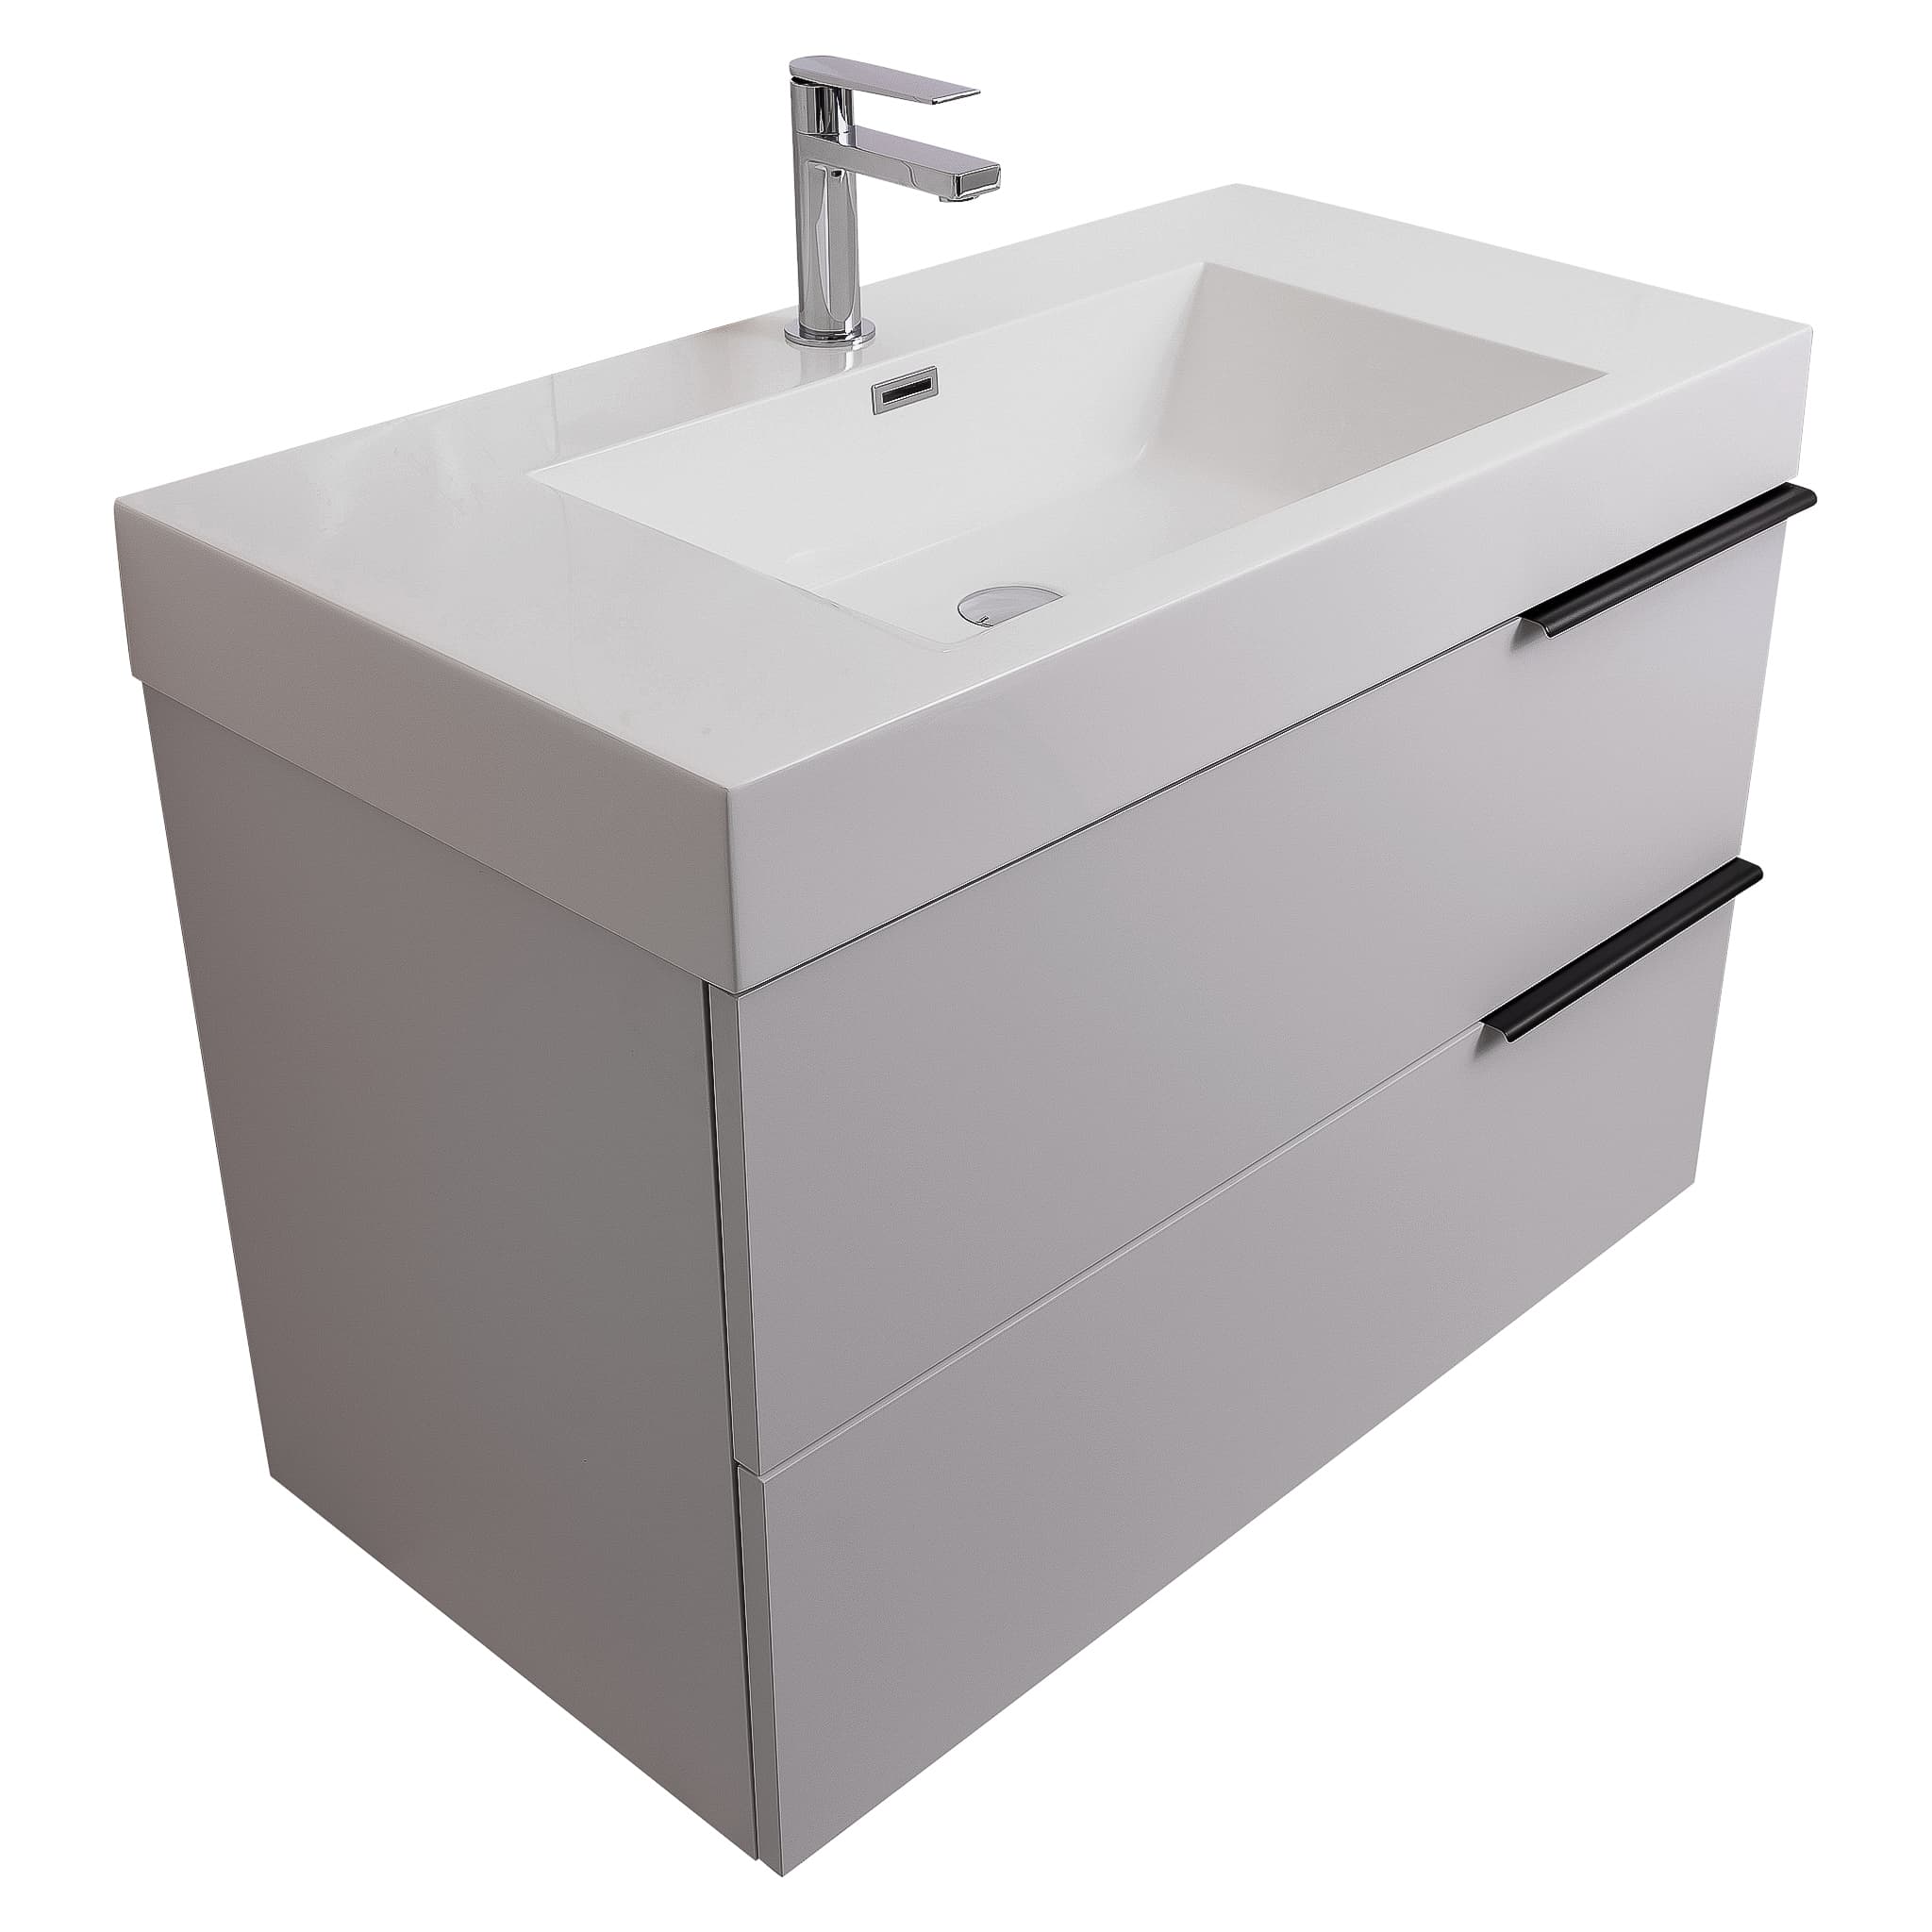 Mallorca 31.5 Matte White Cabinet, Square Cultured Marble Sink, Wall Mounted Modern Vanity Set